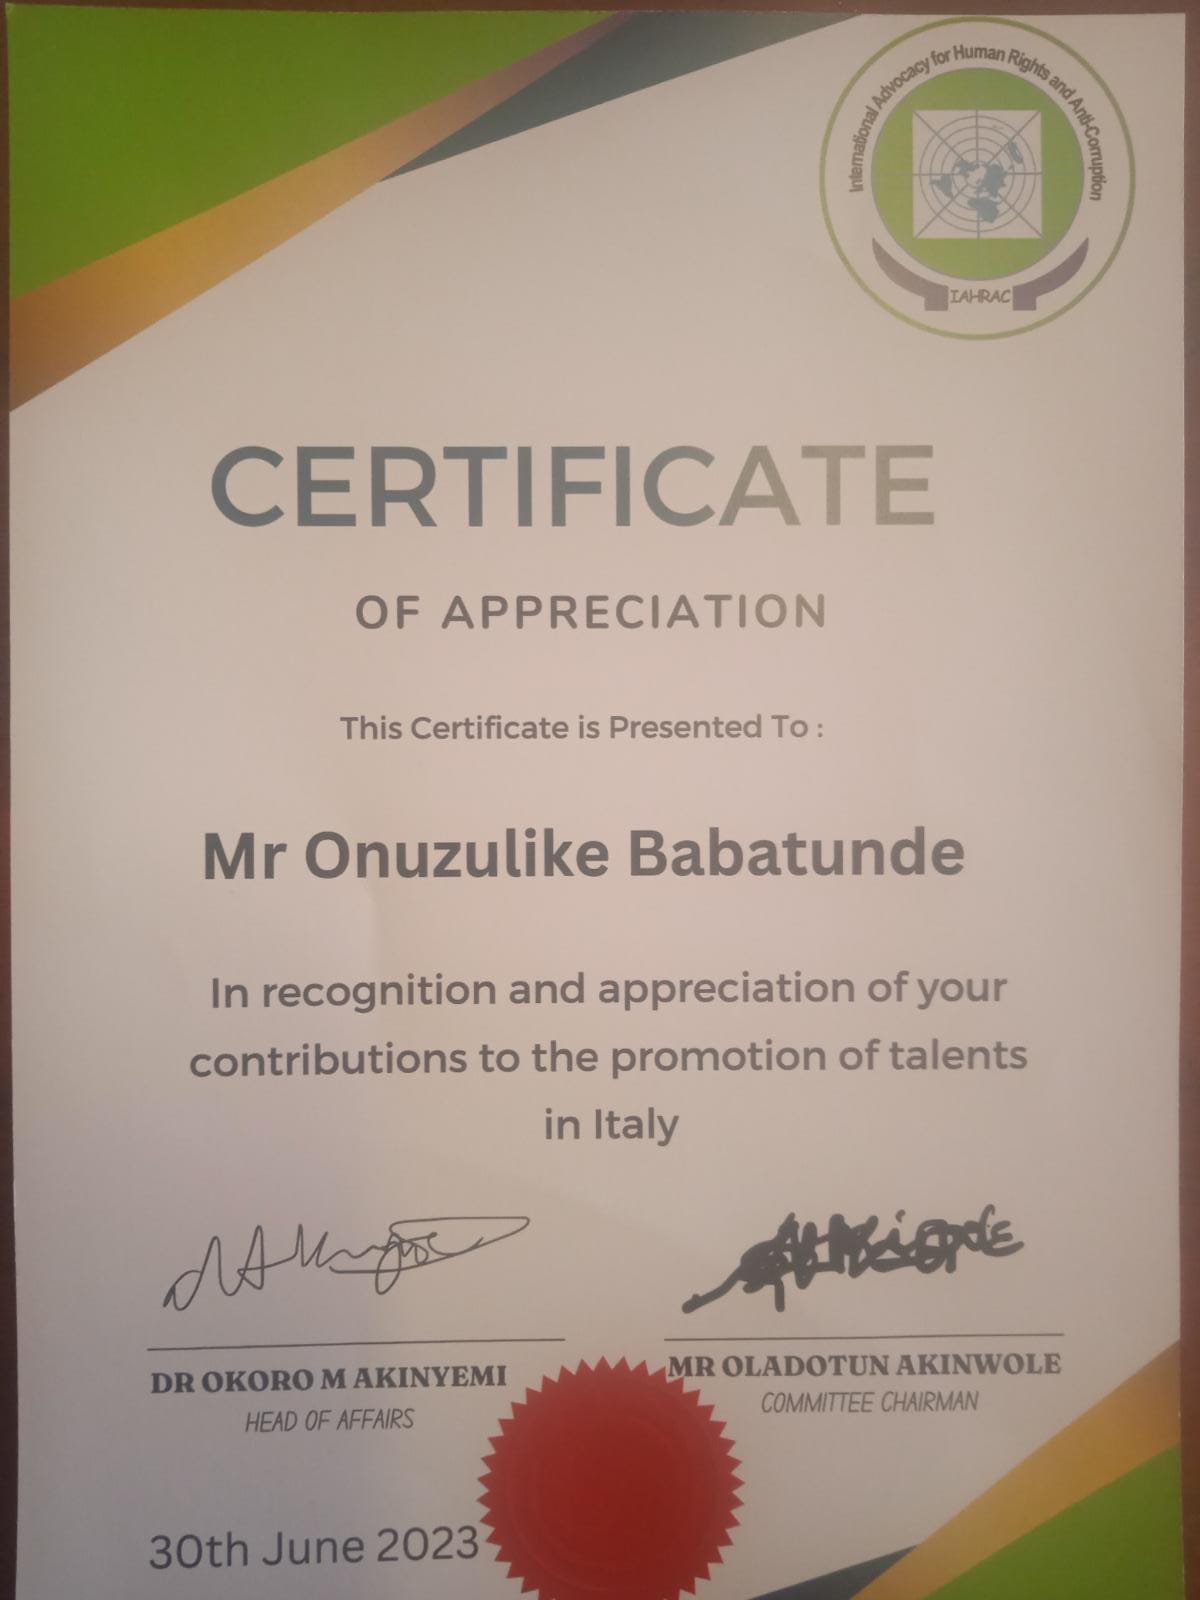 Mr Onuzulike Babatunde receives an award of appreciation towards his contributions to the talents in Italy 